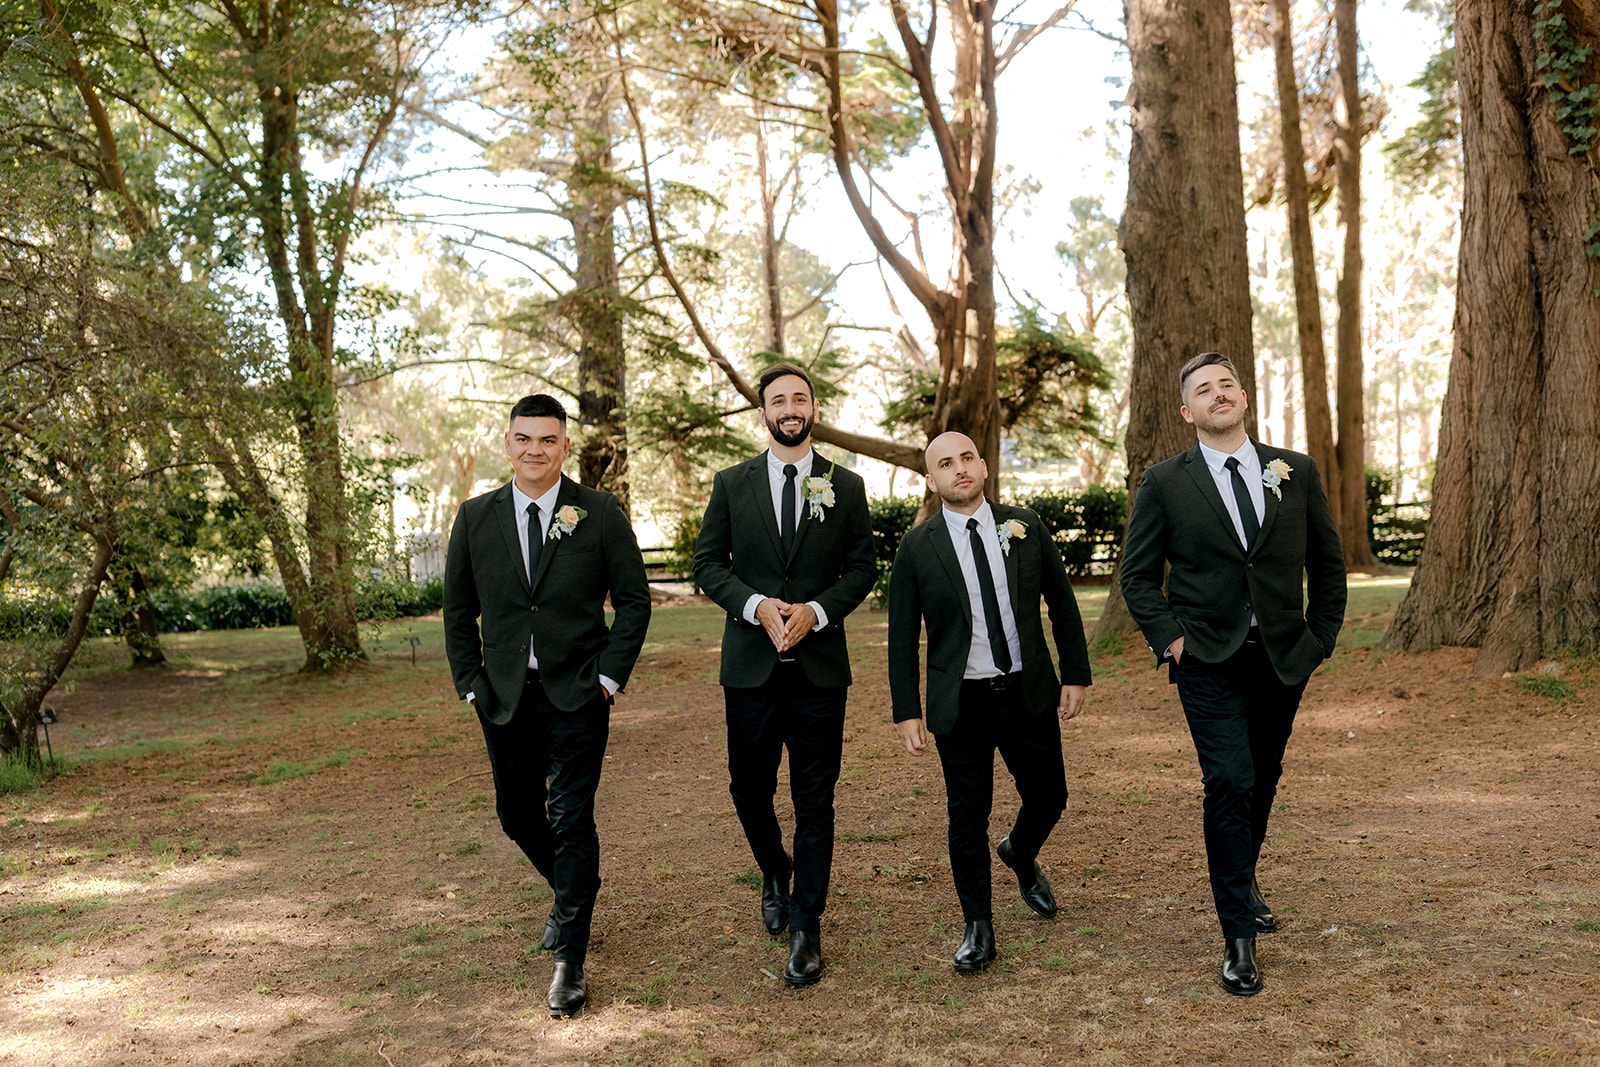 Groom with his groomsmen at his elegant country wedding.